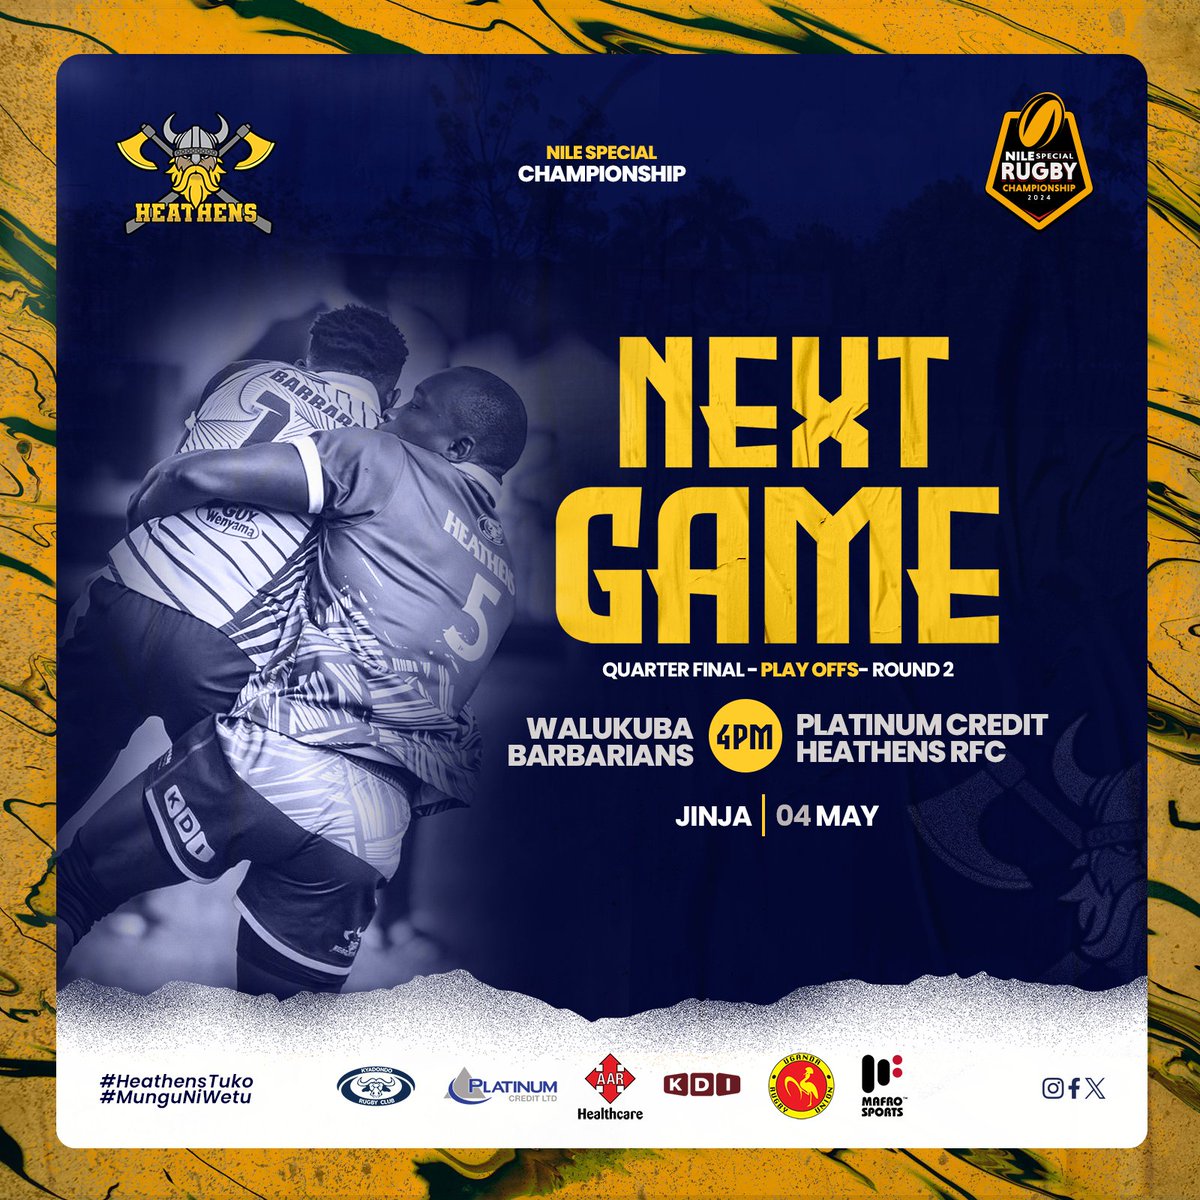 Greetings, salary earners! Join us tomorrow in Jinja to support @HeathensRFC against @WalukubaRugbyUg in the #NSRC quarter-finals 2nd leg. Departing from @KyadondoClub at 9 am. Contact @EdwardKiwanuka6 to hop on our bus. 🤗 #HeathensTuko #KyadondoIsHome